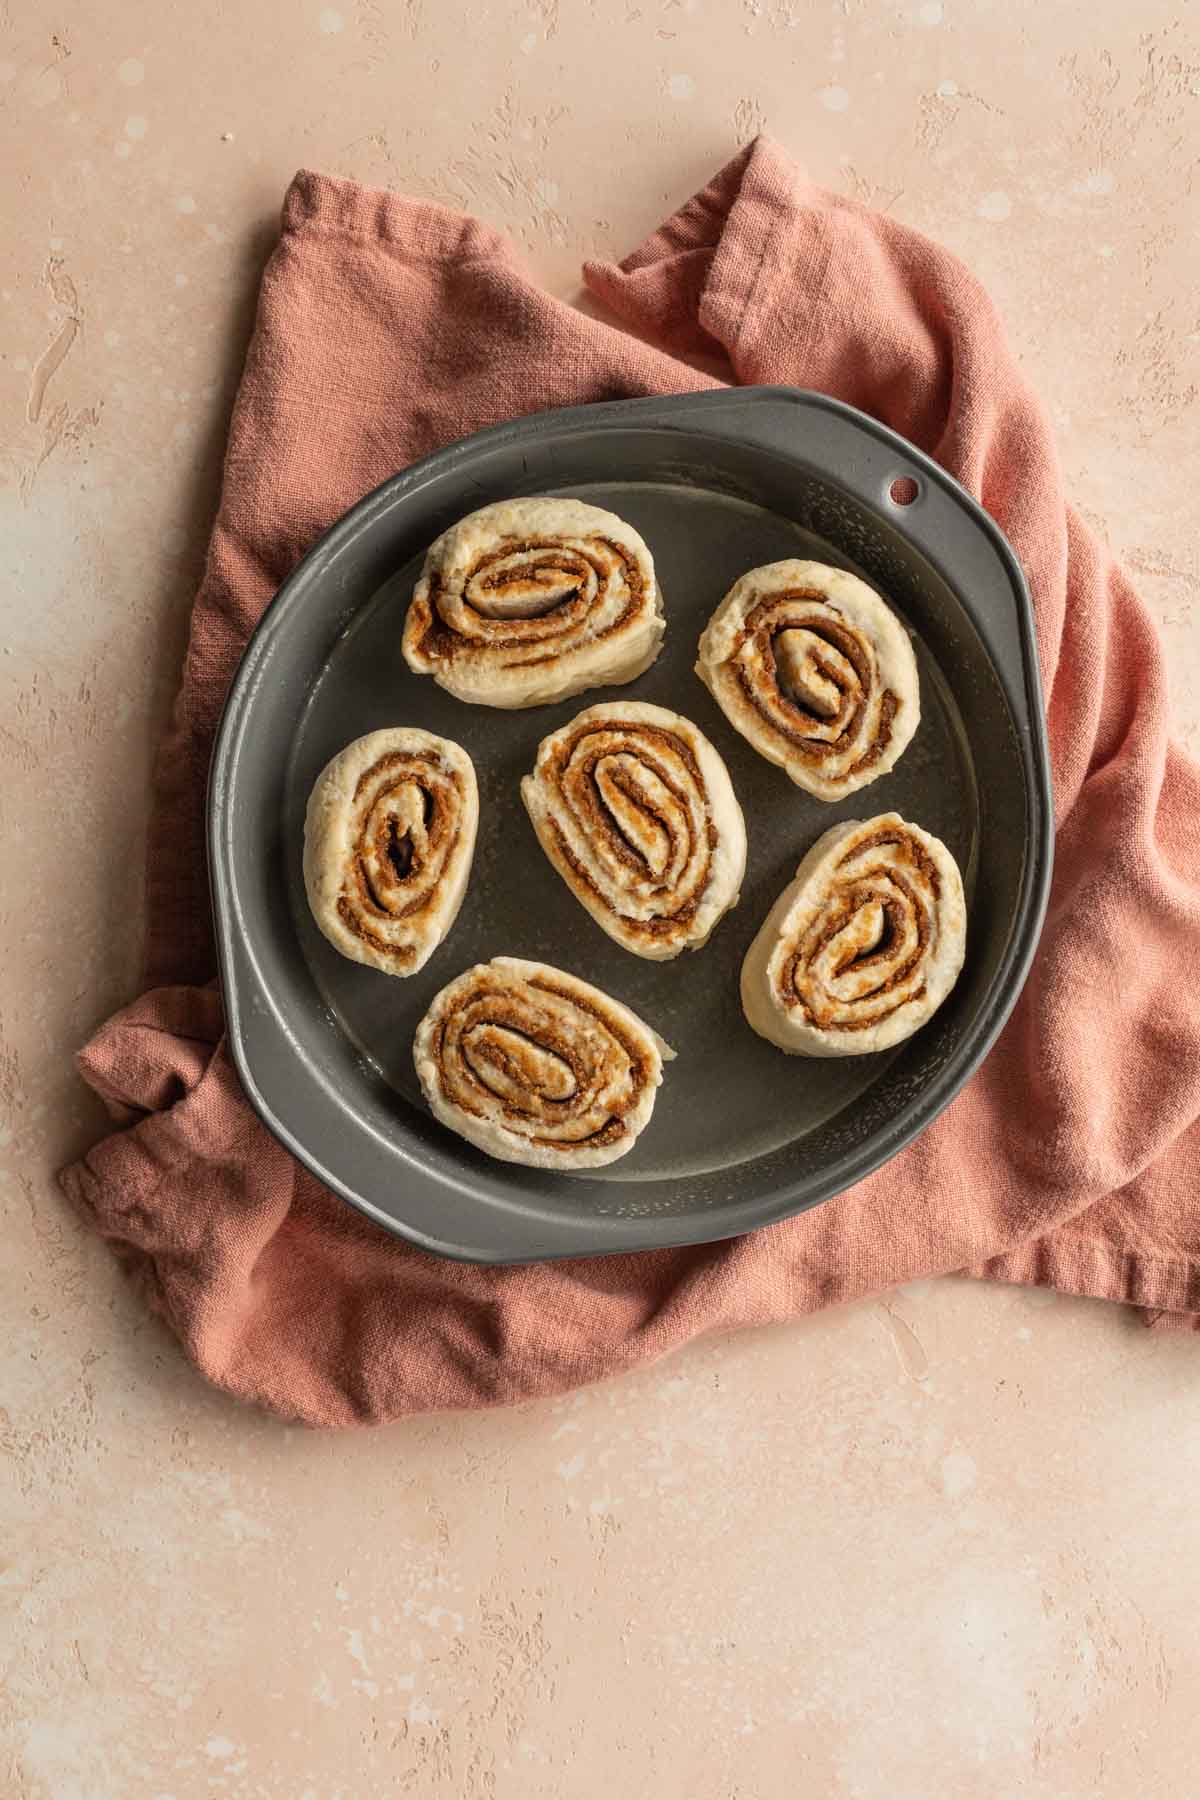 Pre-baked cinnamon rolls arranged in a round cake pan.